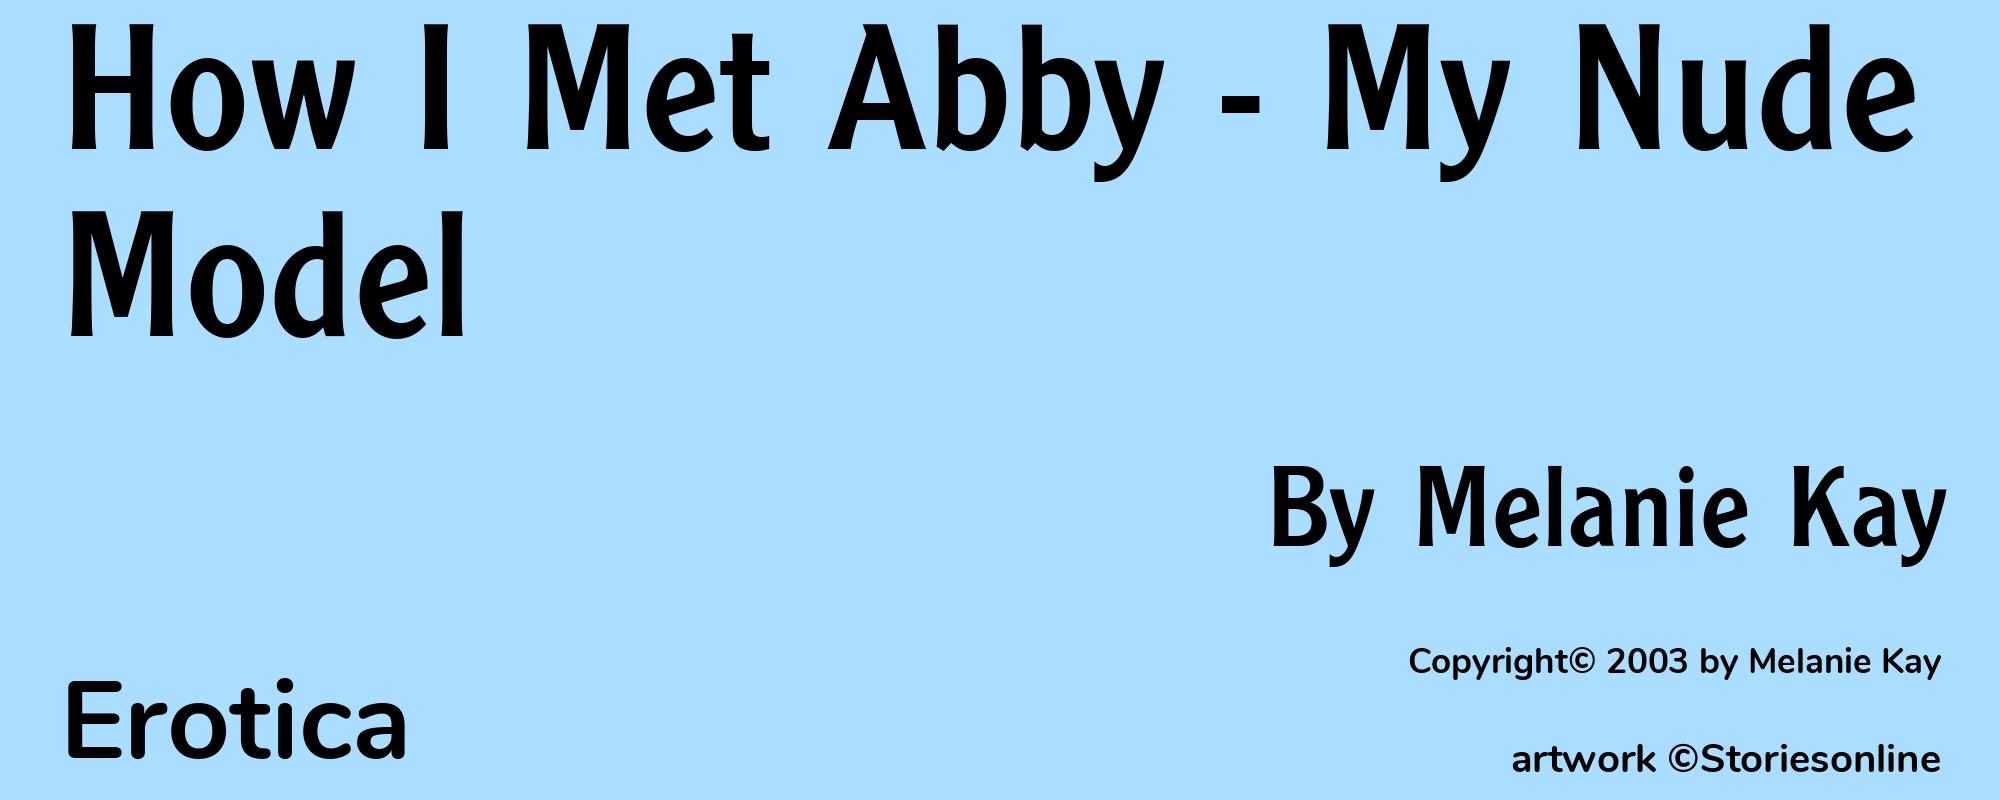 How I Met Abby - My Nude Model - Cover